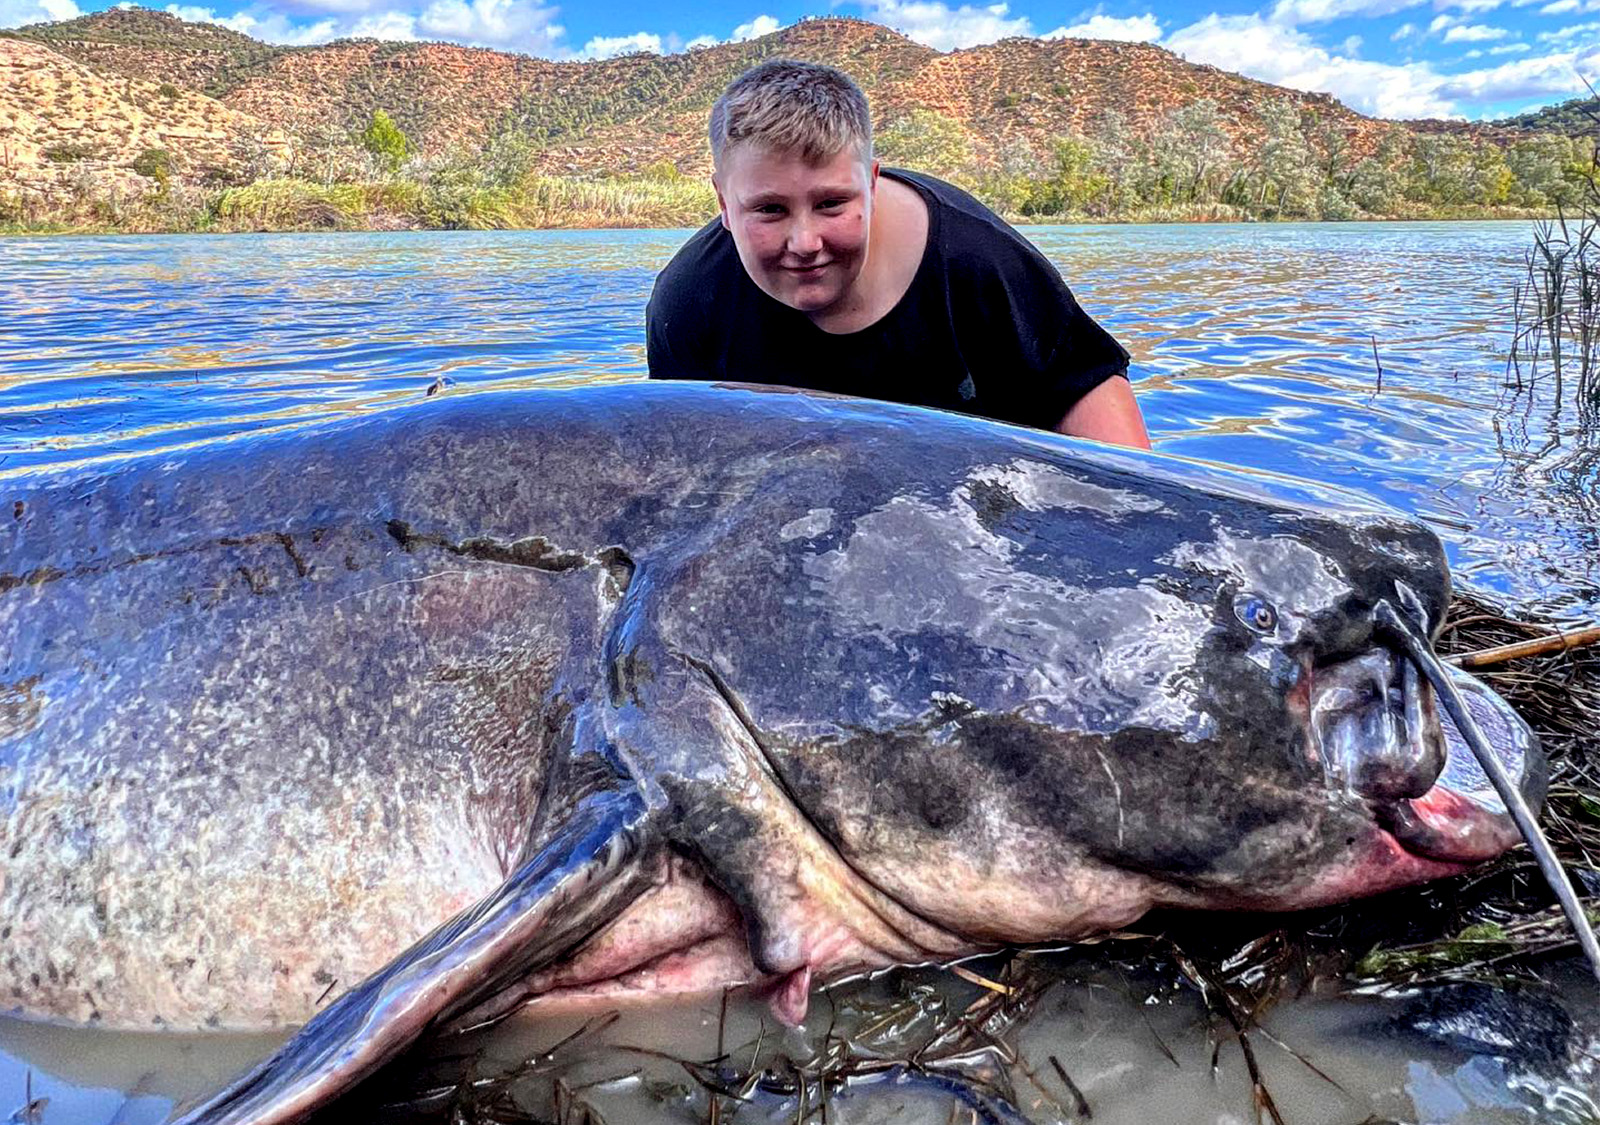 A British boy catches a monster catfish almost twice his size